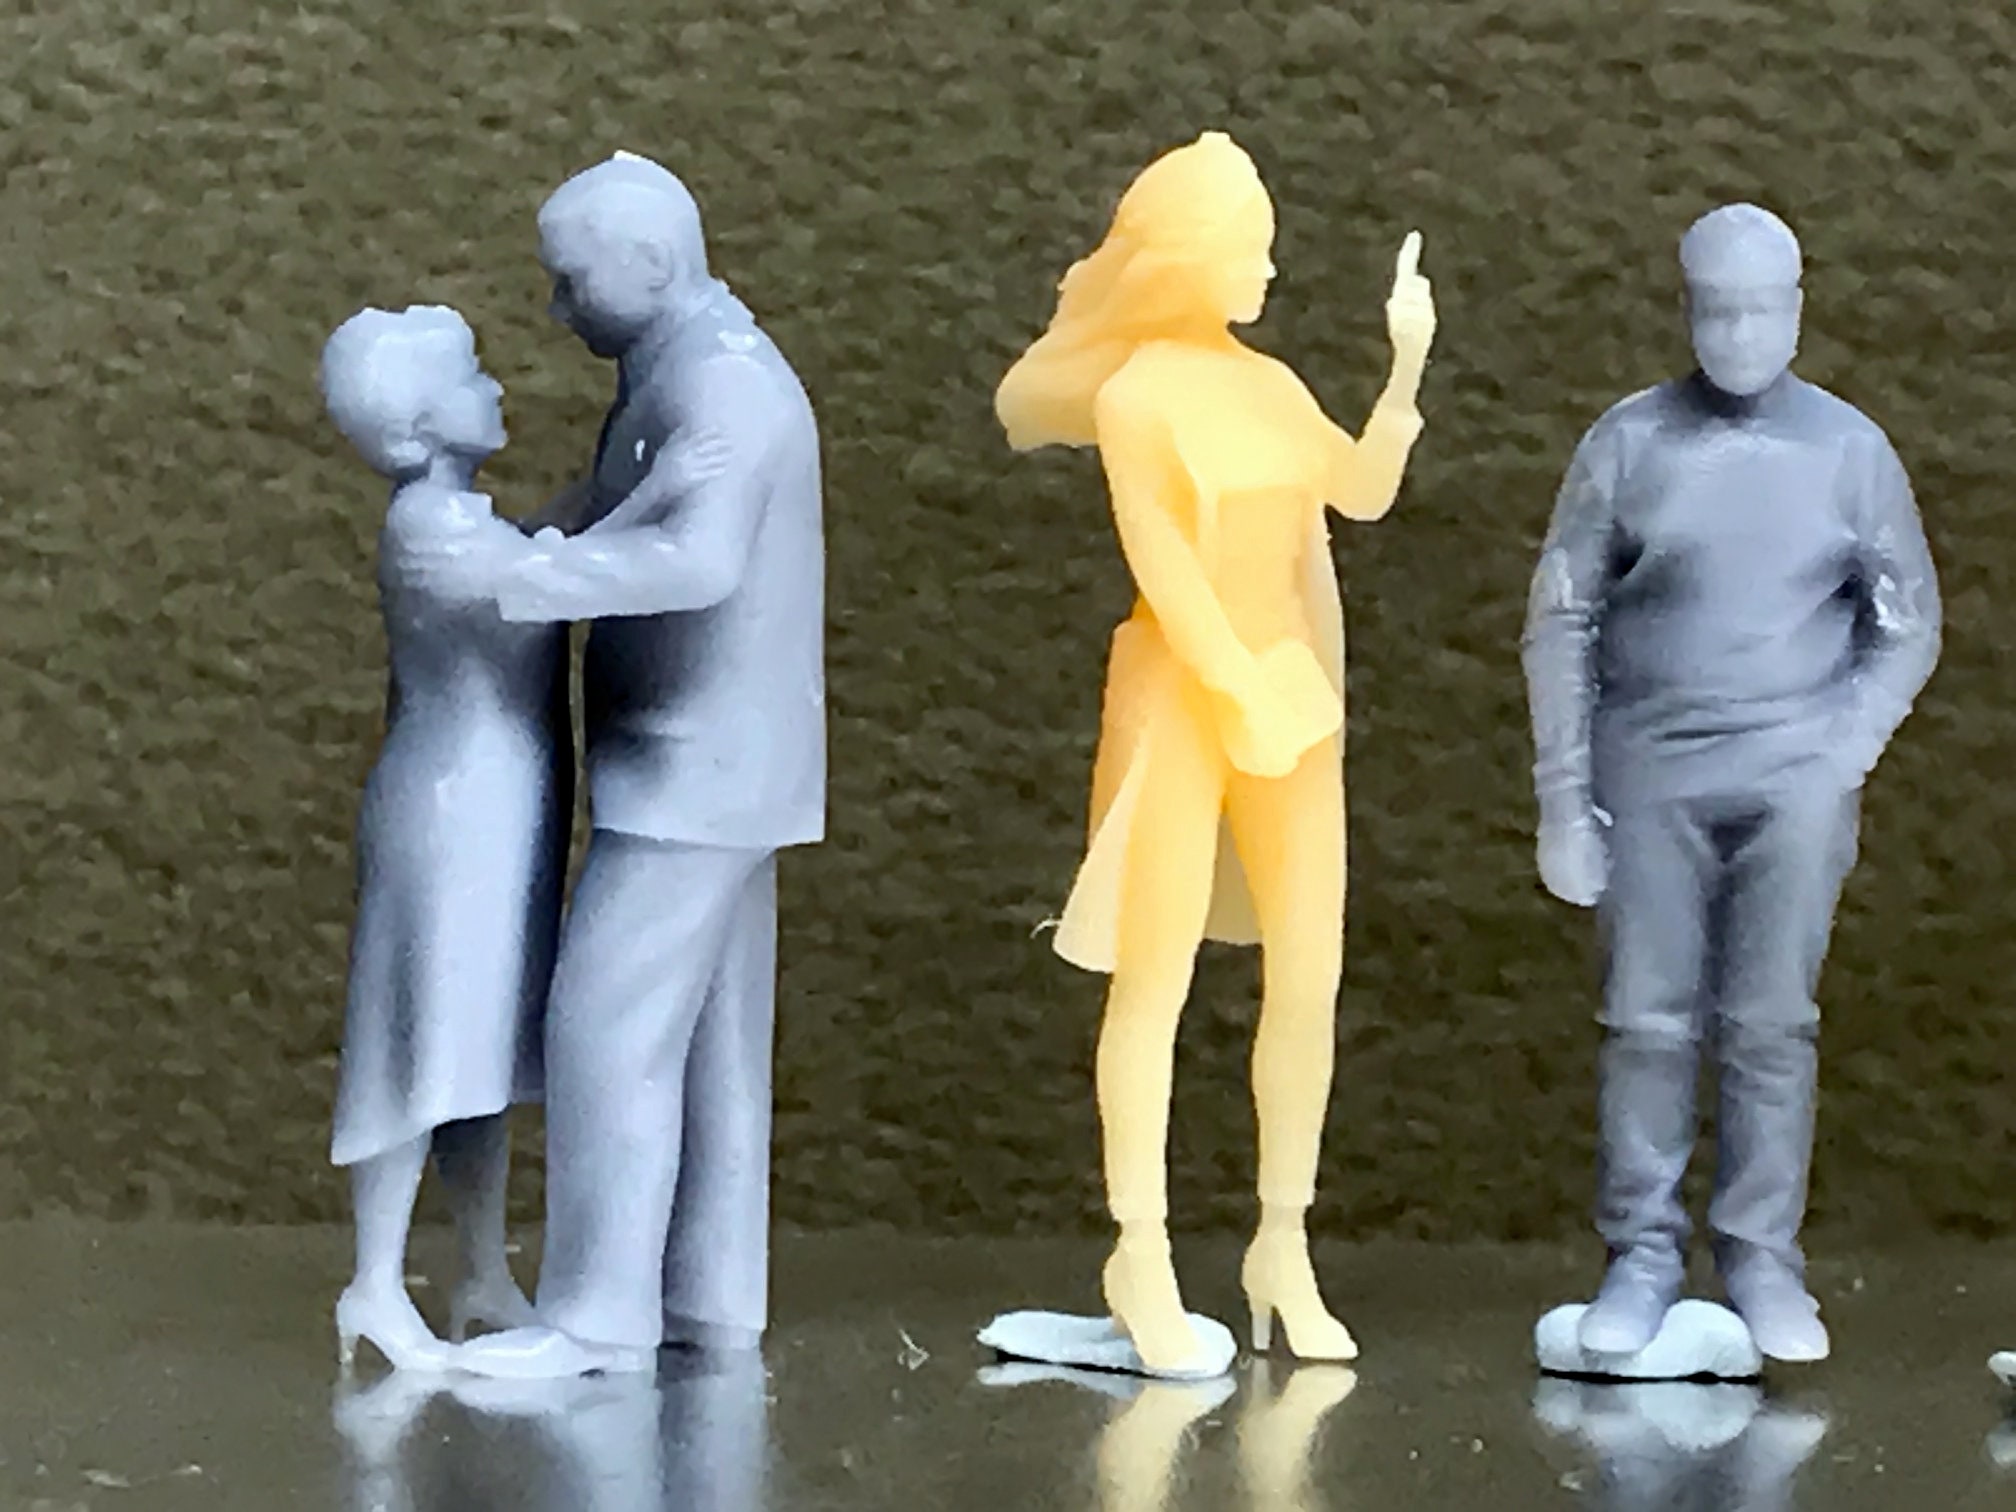 1:64 Miniature Human Figures Resin / Unpainted Great for Dioramas / Hot  Wheels Made in the USA GROUP 205 Miniature Figures -  Denmark